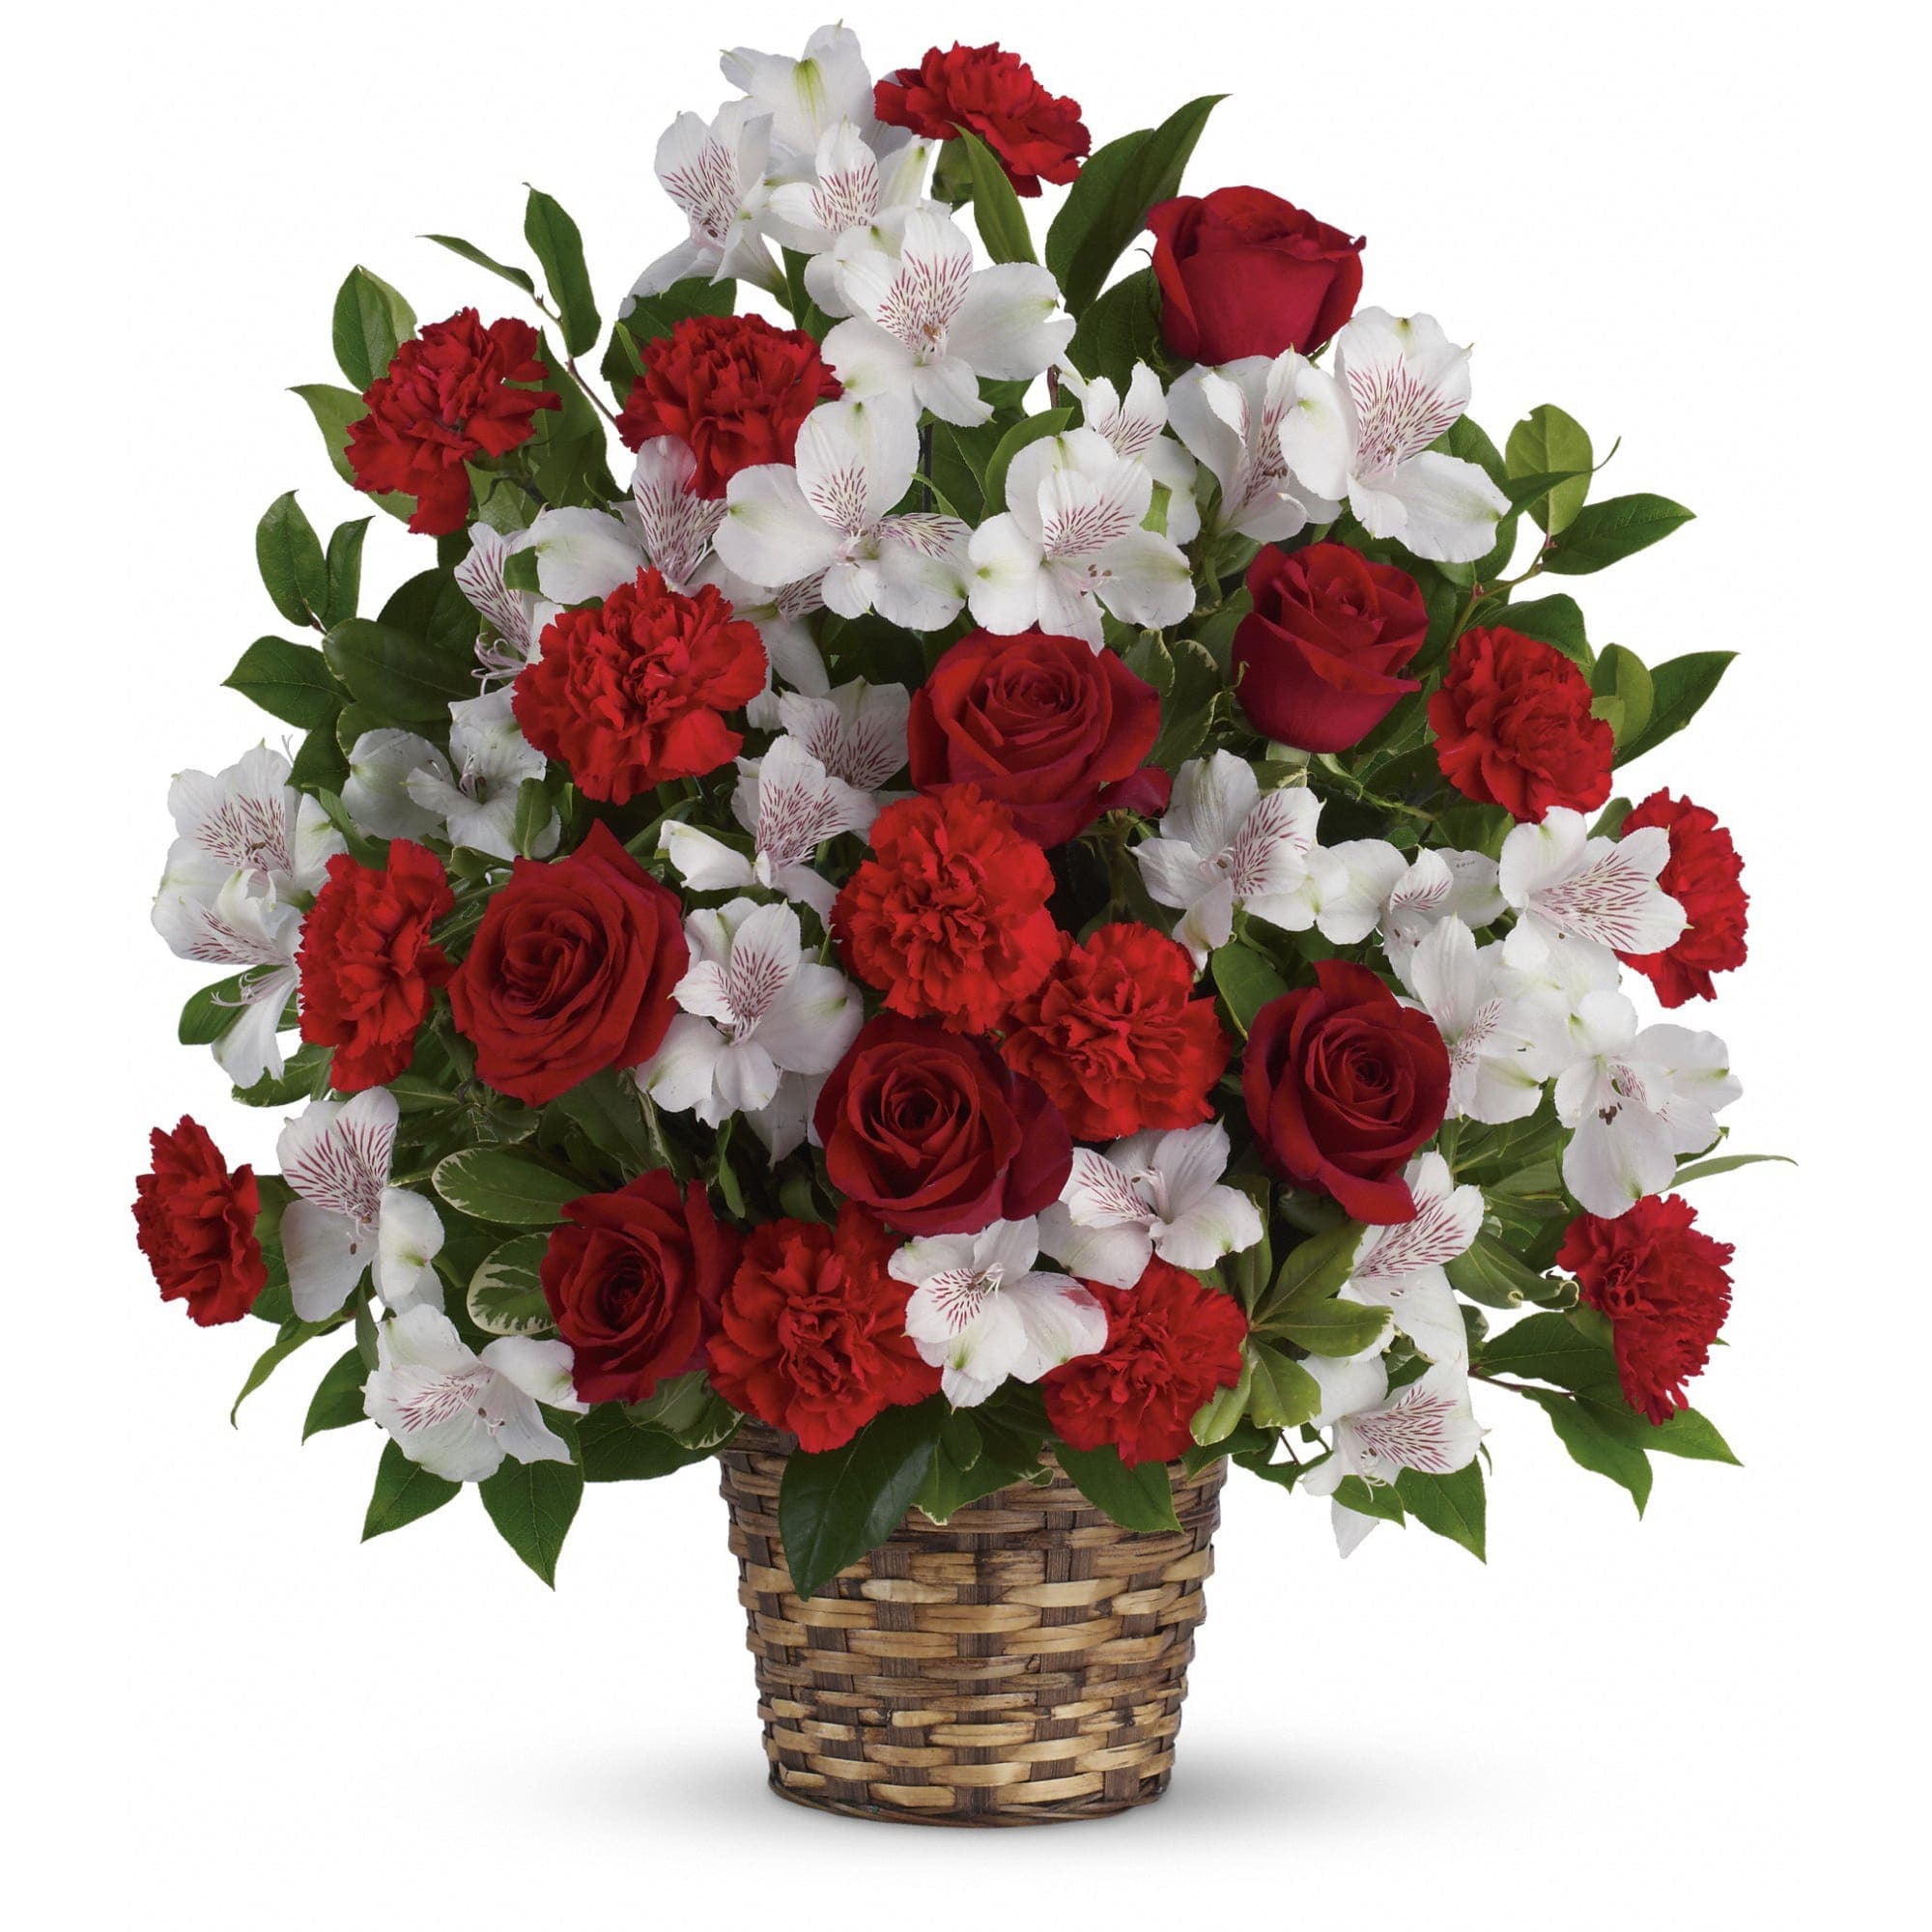 Truly Beloved Bouquet by Teleflora - Reach out to the family at home with this lovely array of classic blooms artistically arranged in a beautifully woven basket. They'll be deeply touched. 